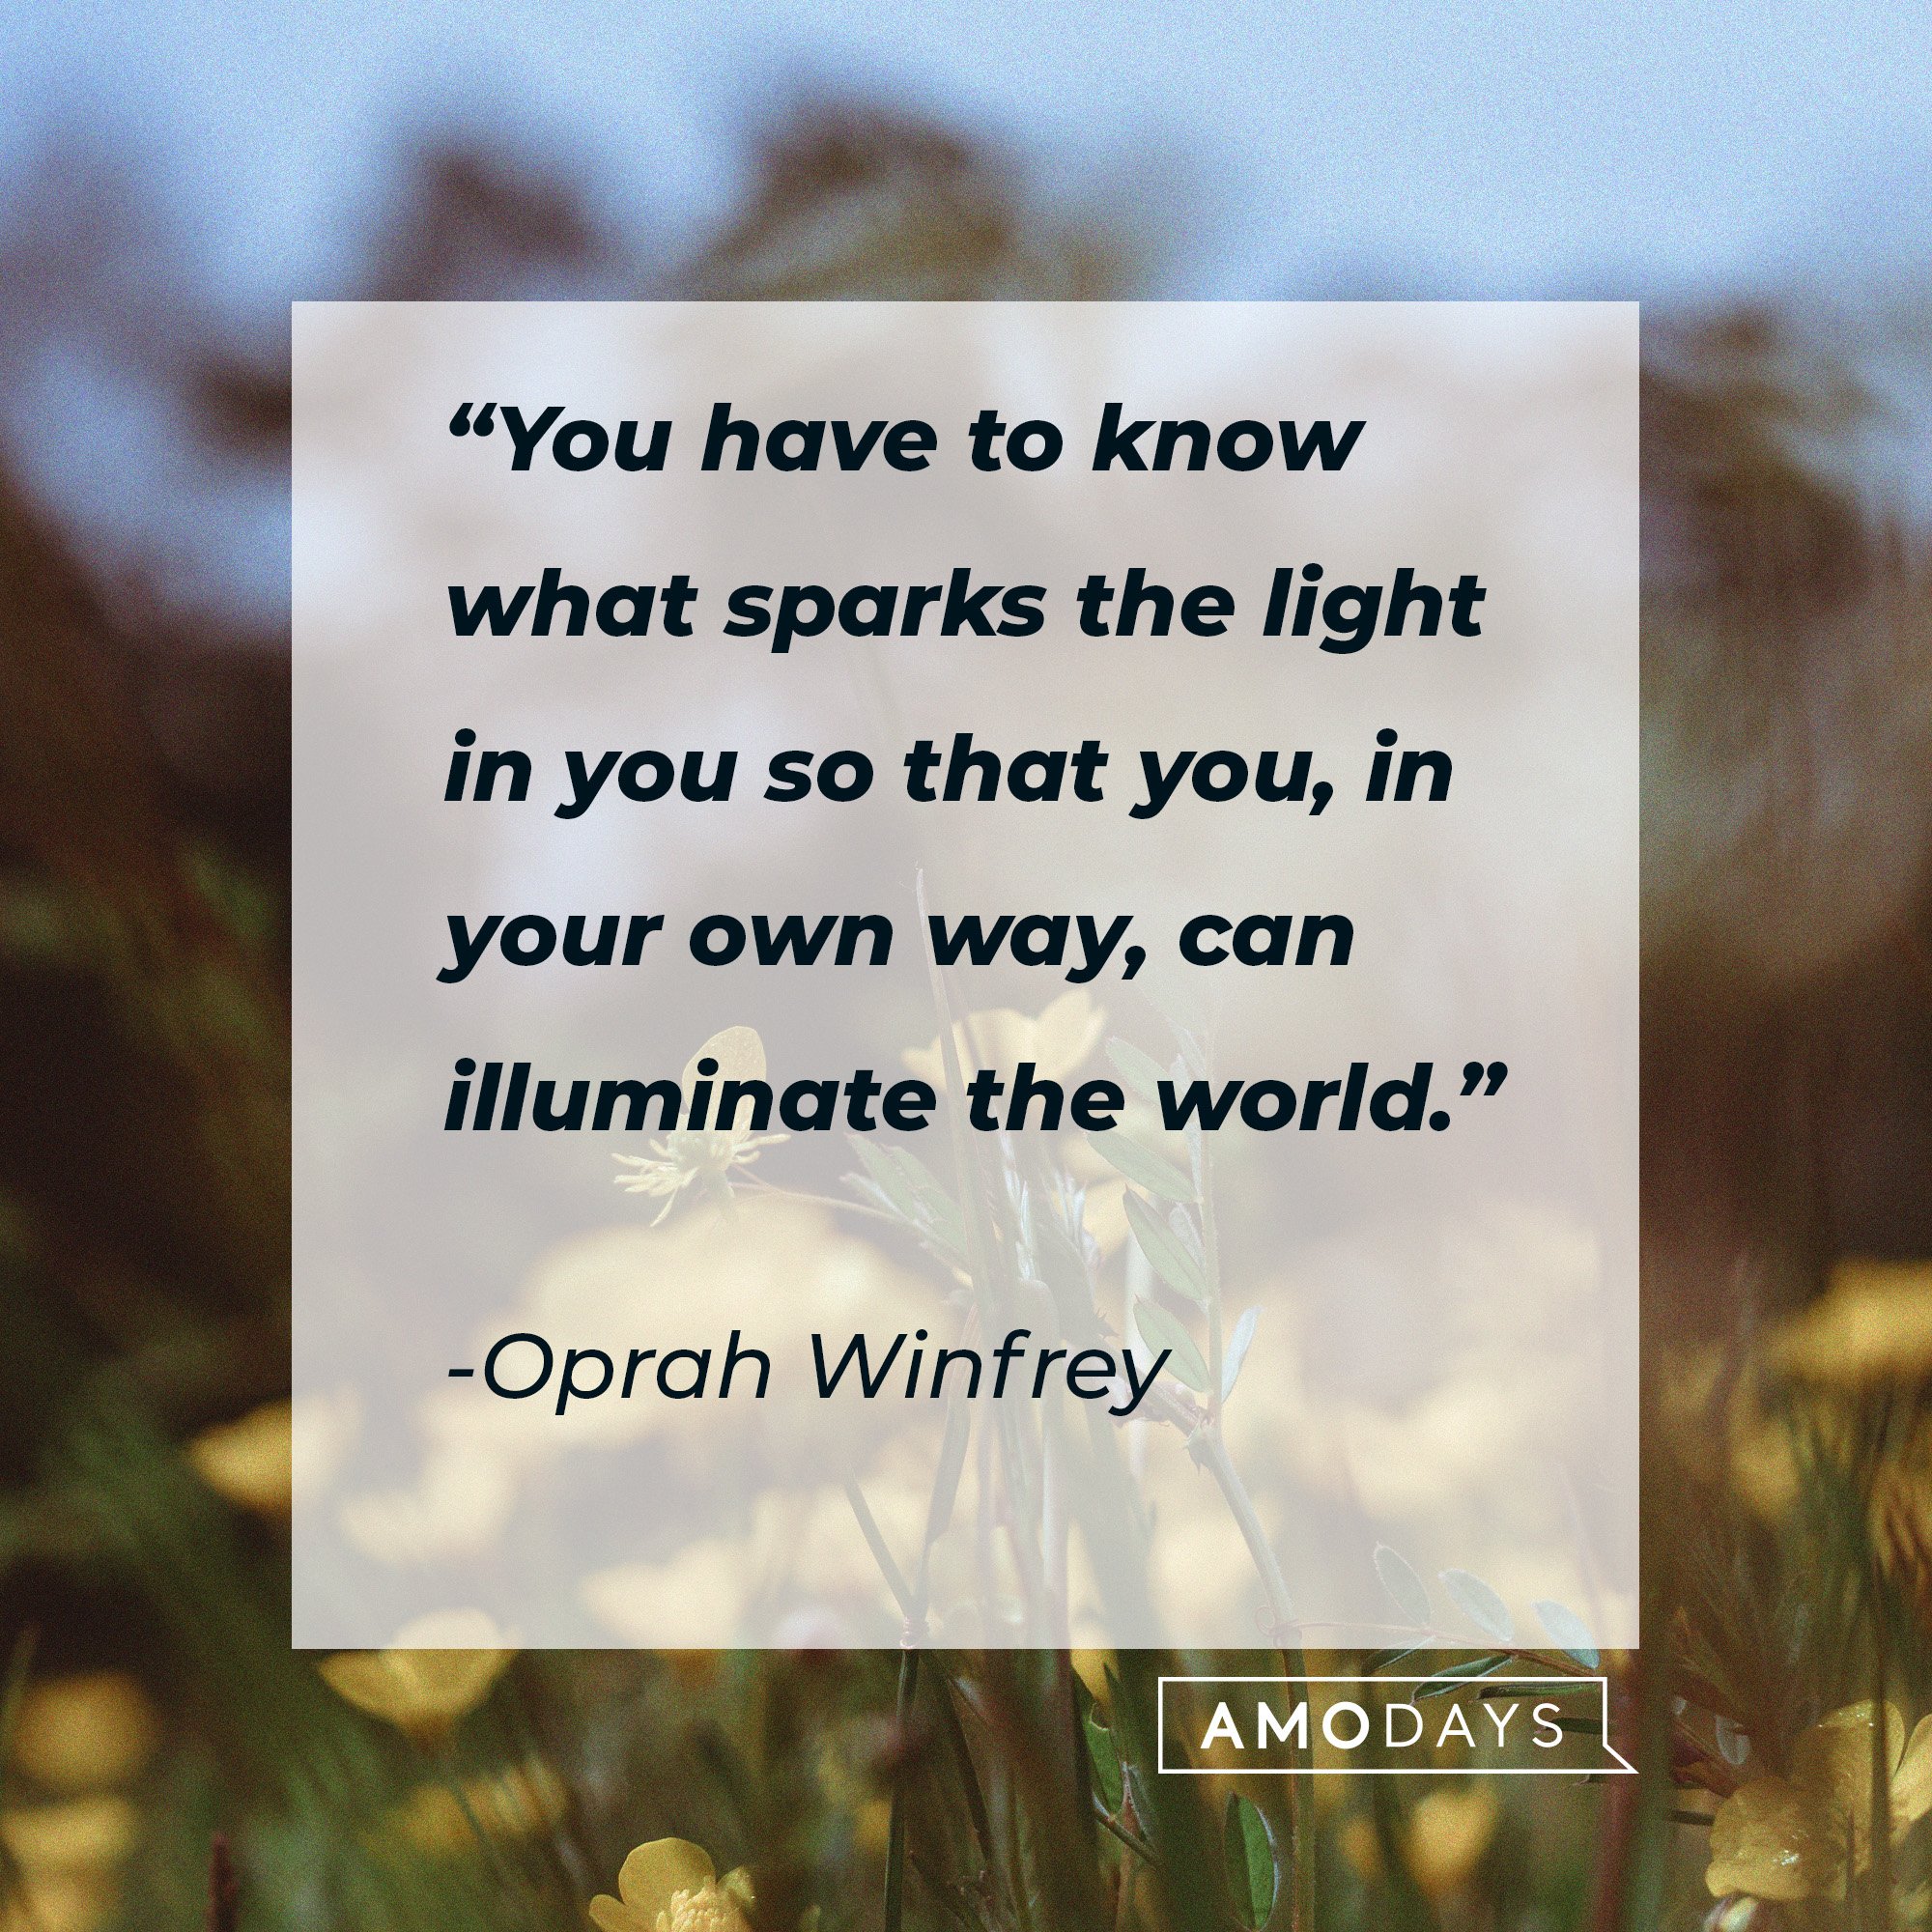  Oprah Winfrey's quote: “You have to know what sparks the light in you so that you, in your own way, can illuminate the world.” | Image: AmoDays